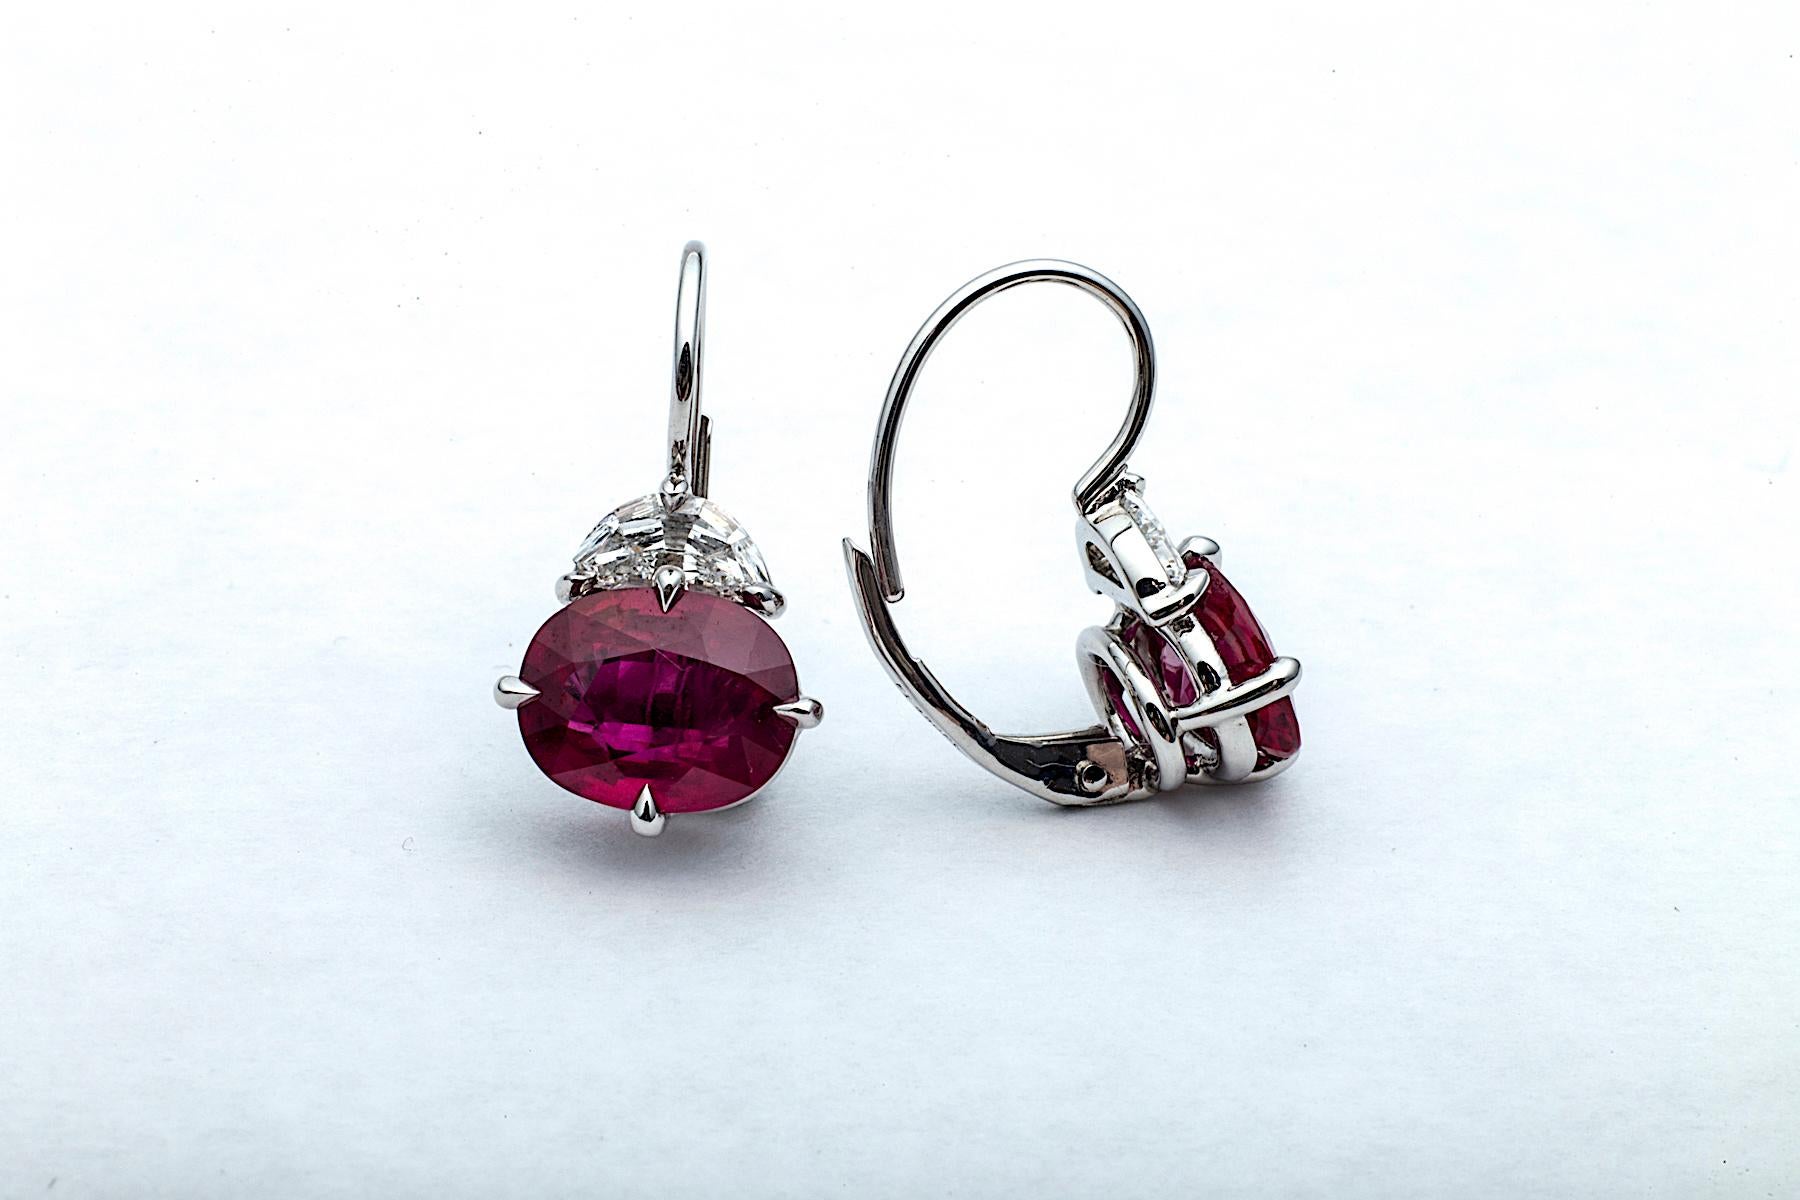 Experience the power and pop of the color red when wearing these extraordinary ruby and diamond handmade drop earrings designed by Steven Fox.  These oval cut vibrant red Burmese rubies, totaling 3.91 carats, are crowned with half moon cut diamonds,